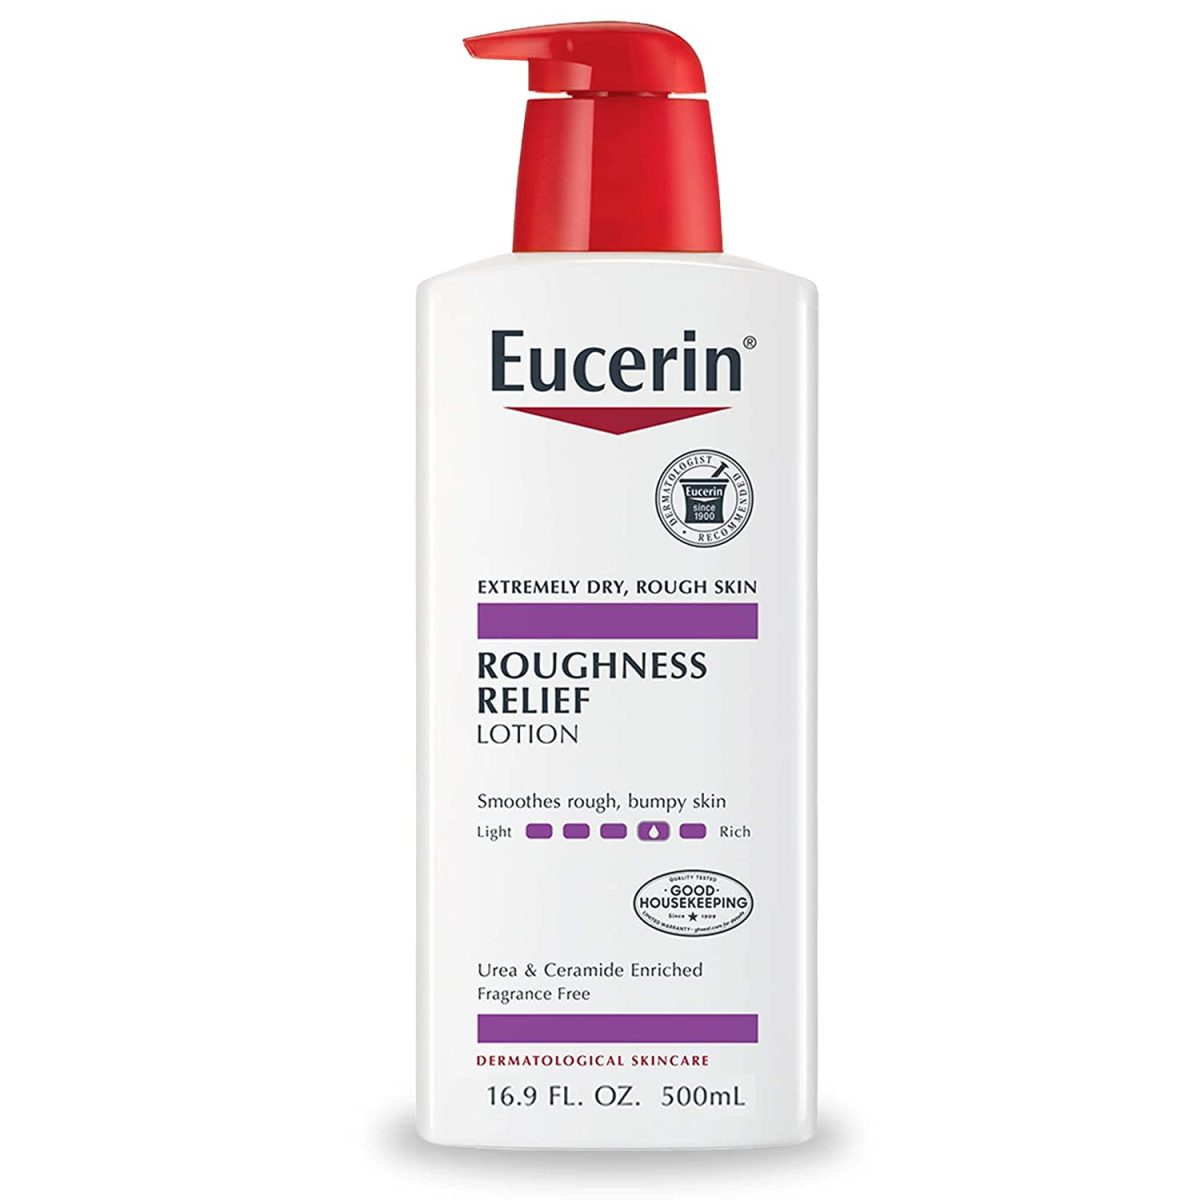 Eucerin, Roughness Relief Lotion, Fragrance Free (500 ml)